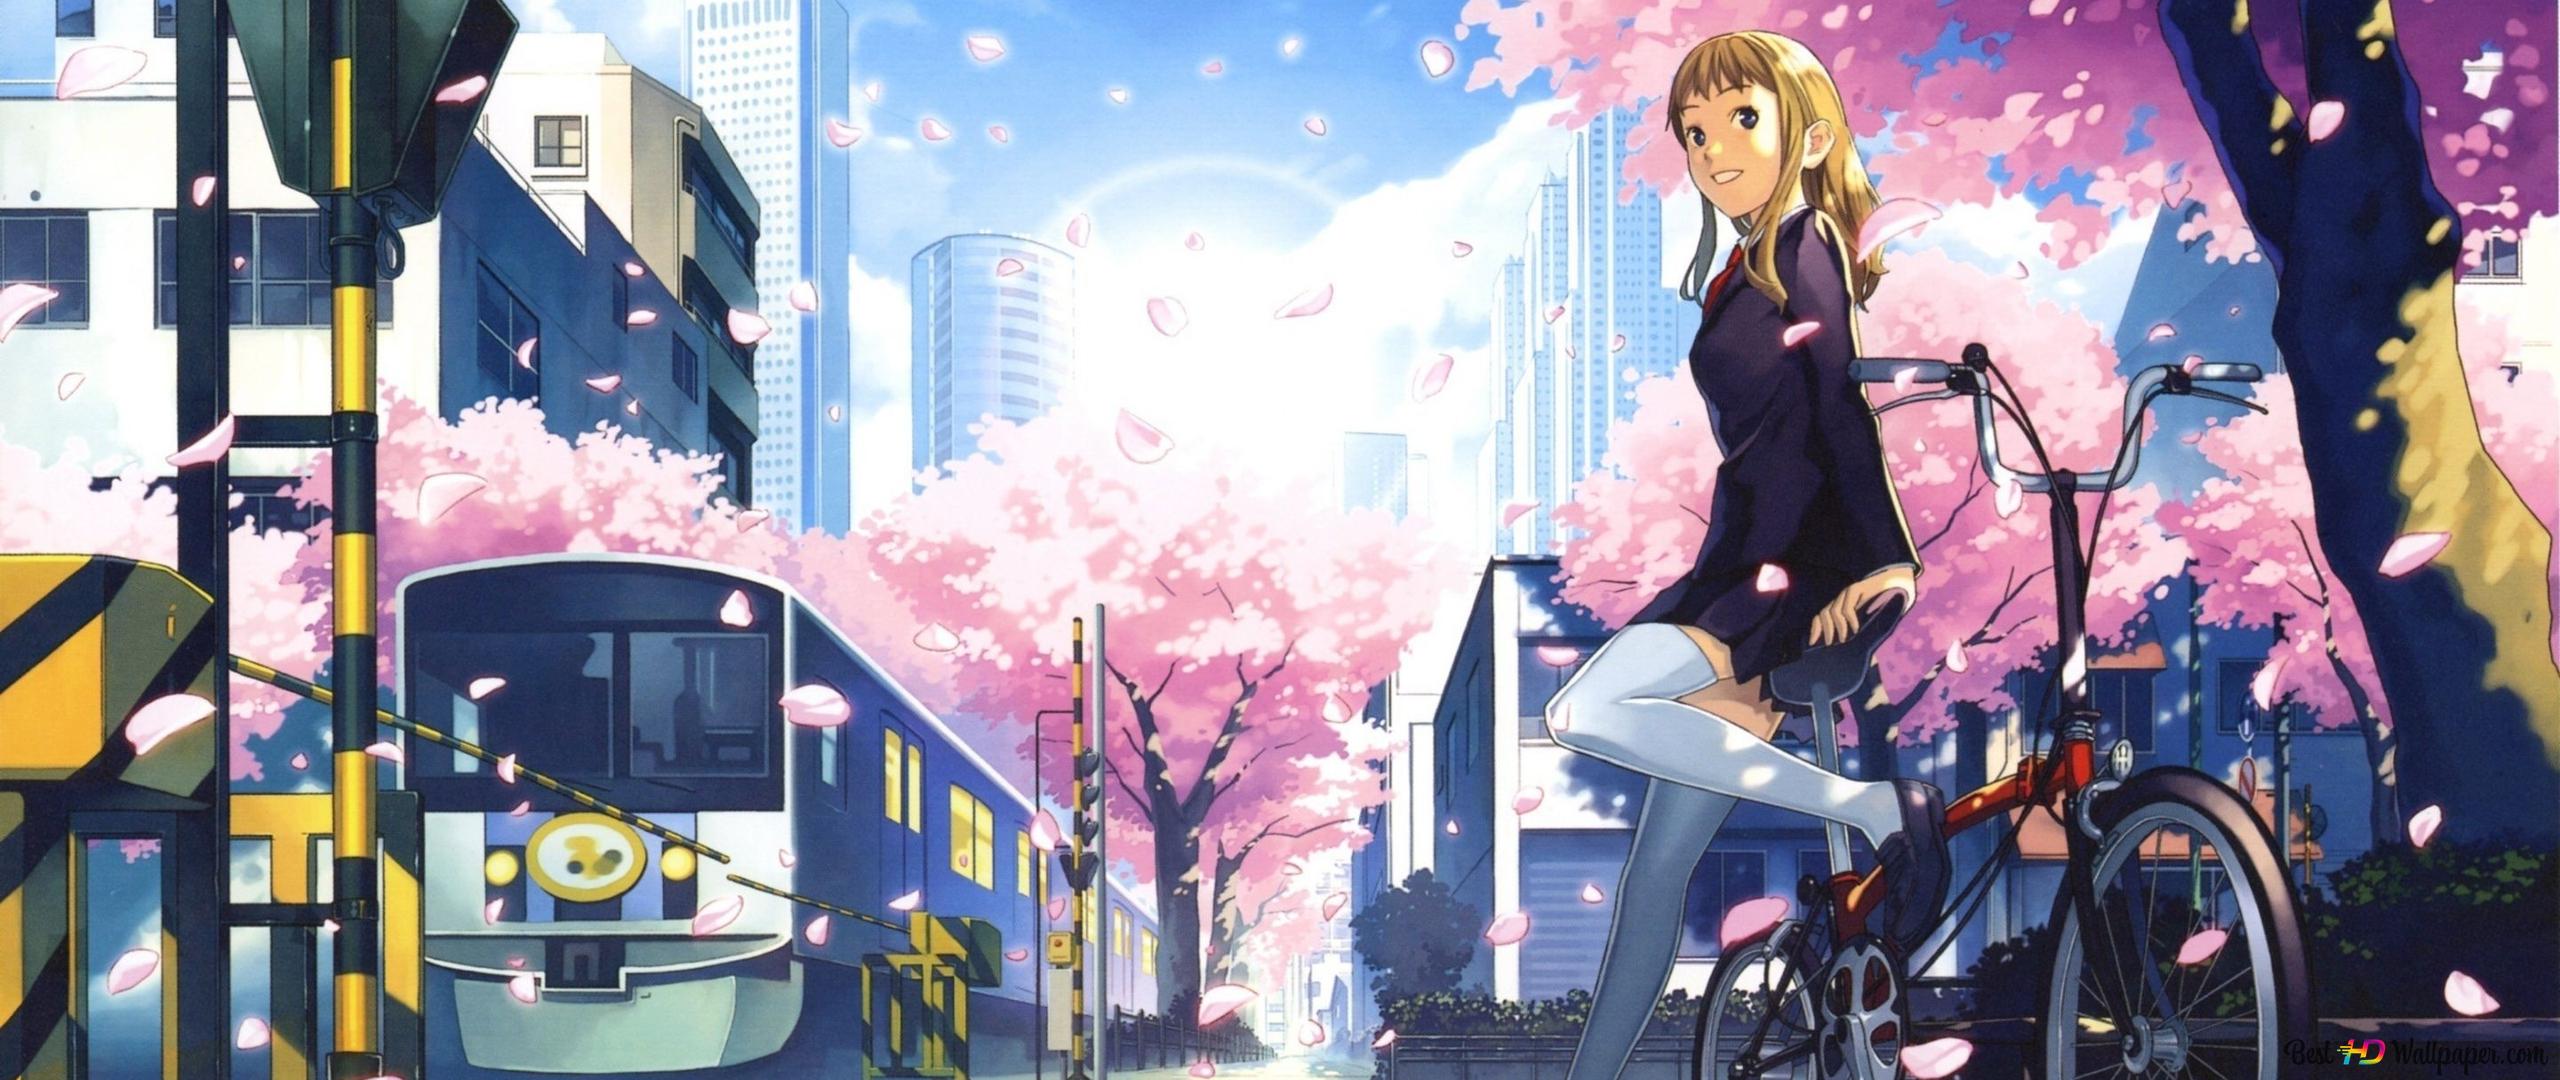 Anime girl riding a bike in the city - Anime landscape